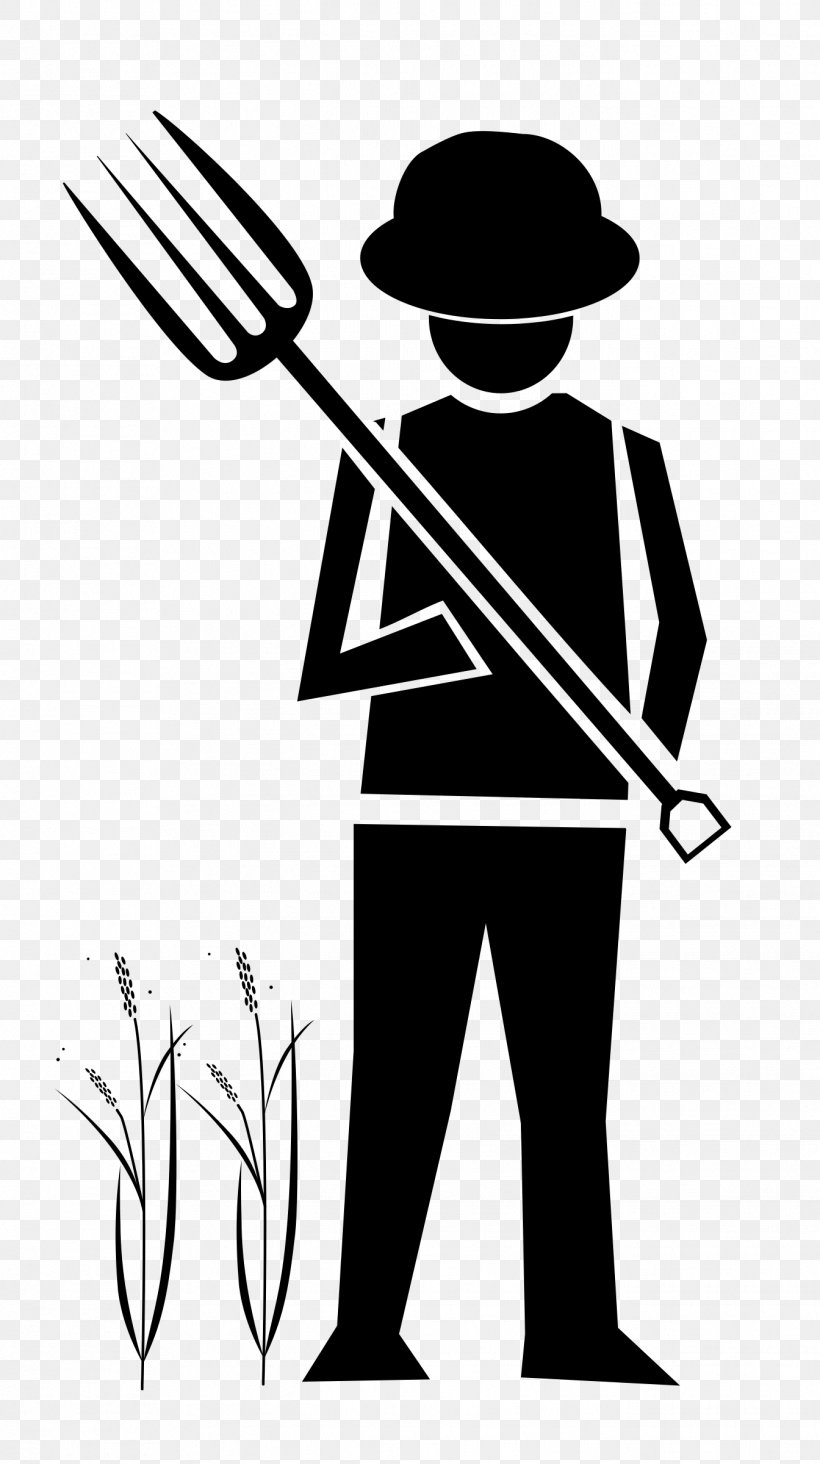 Clip Art Musical Instrument Accessory Illustration Silhouette Cartoon, PNG, 1344x2400px, Musical Instrument Accessory, Art, Behavior, Black, Cartoon Download Free